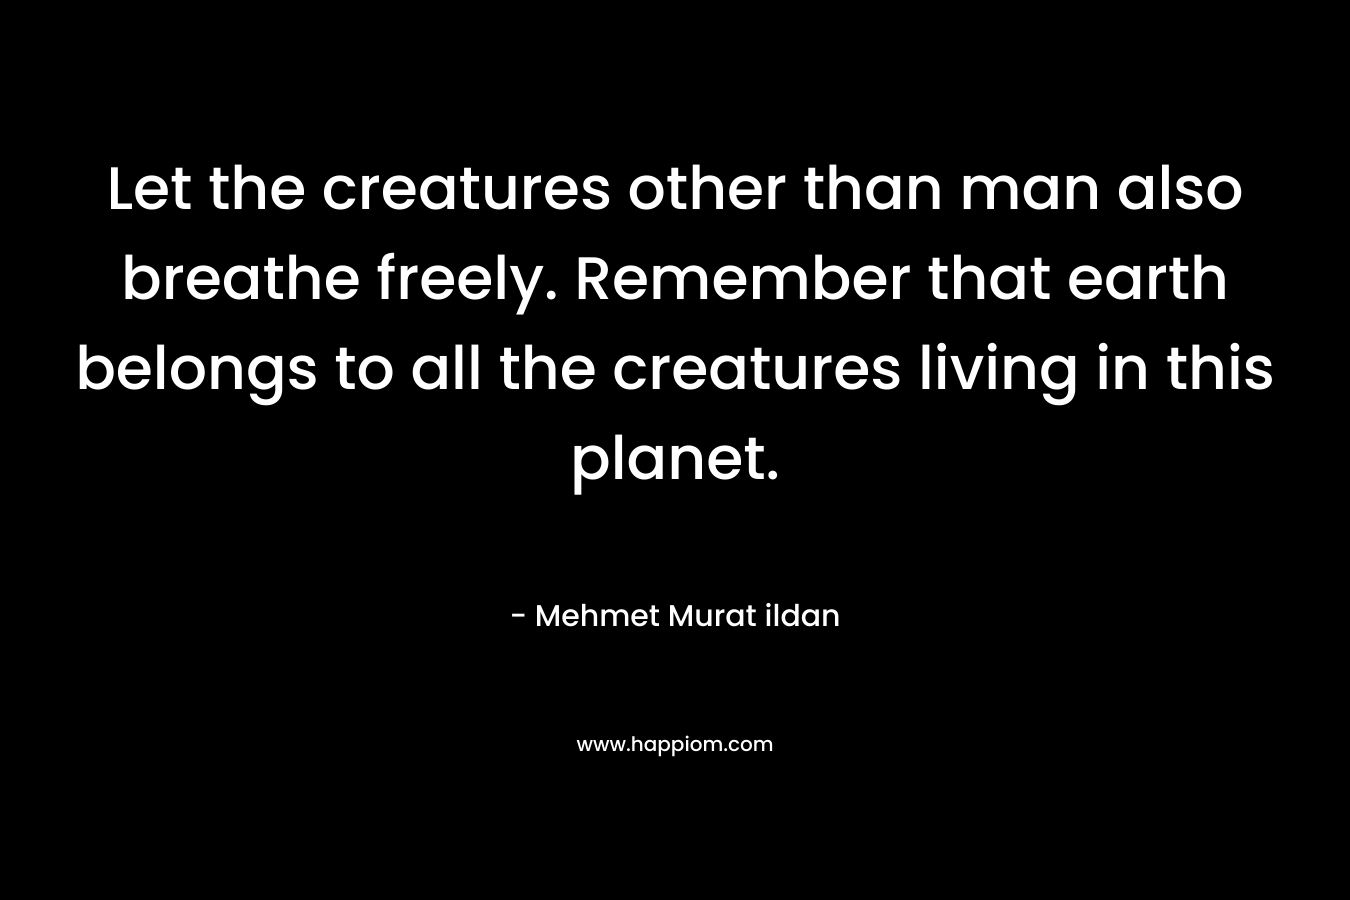 Let the creatures other than man also breathe freely. Remember that earth belongs to all the creatures living in this planet. – Mehmet Murat ildan